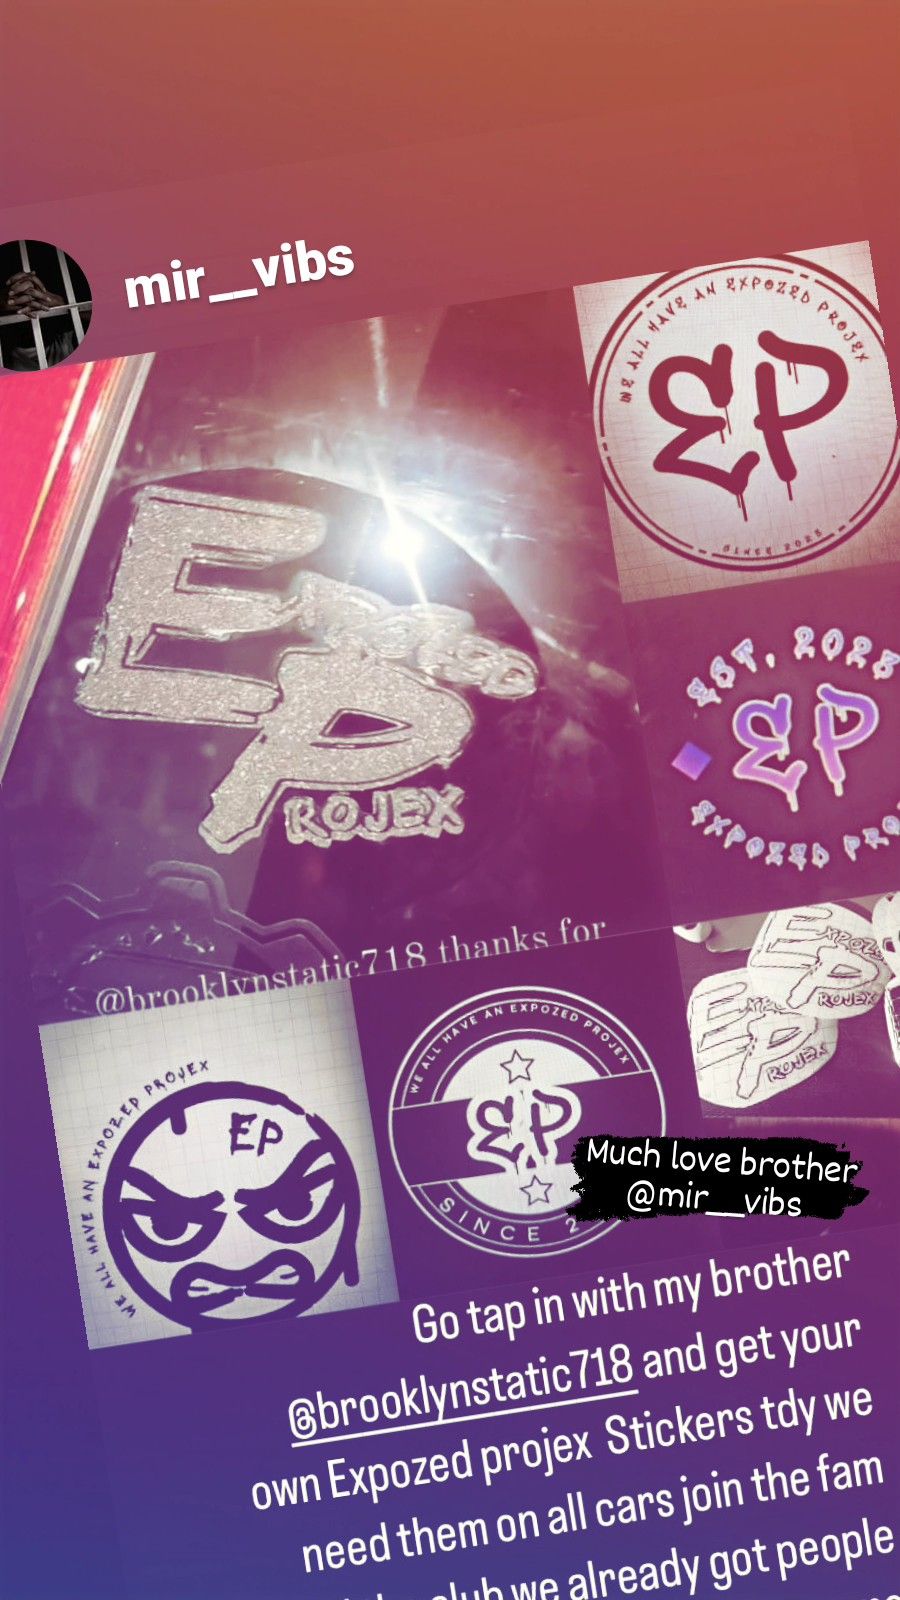 Expozed Projex Stickers